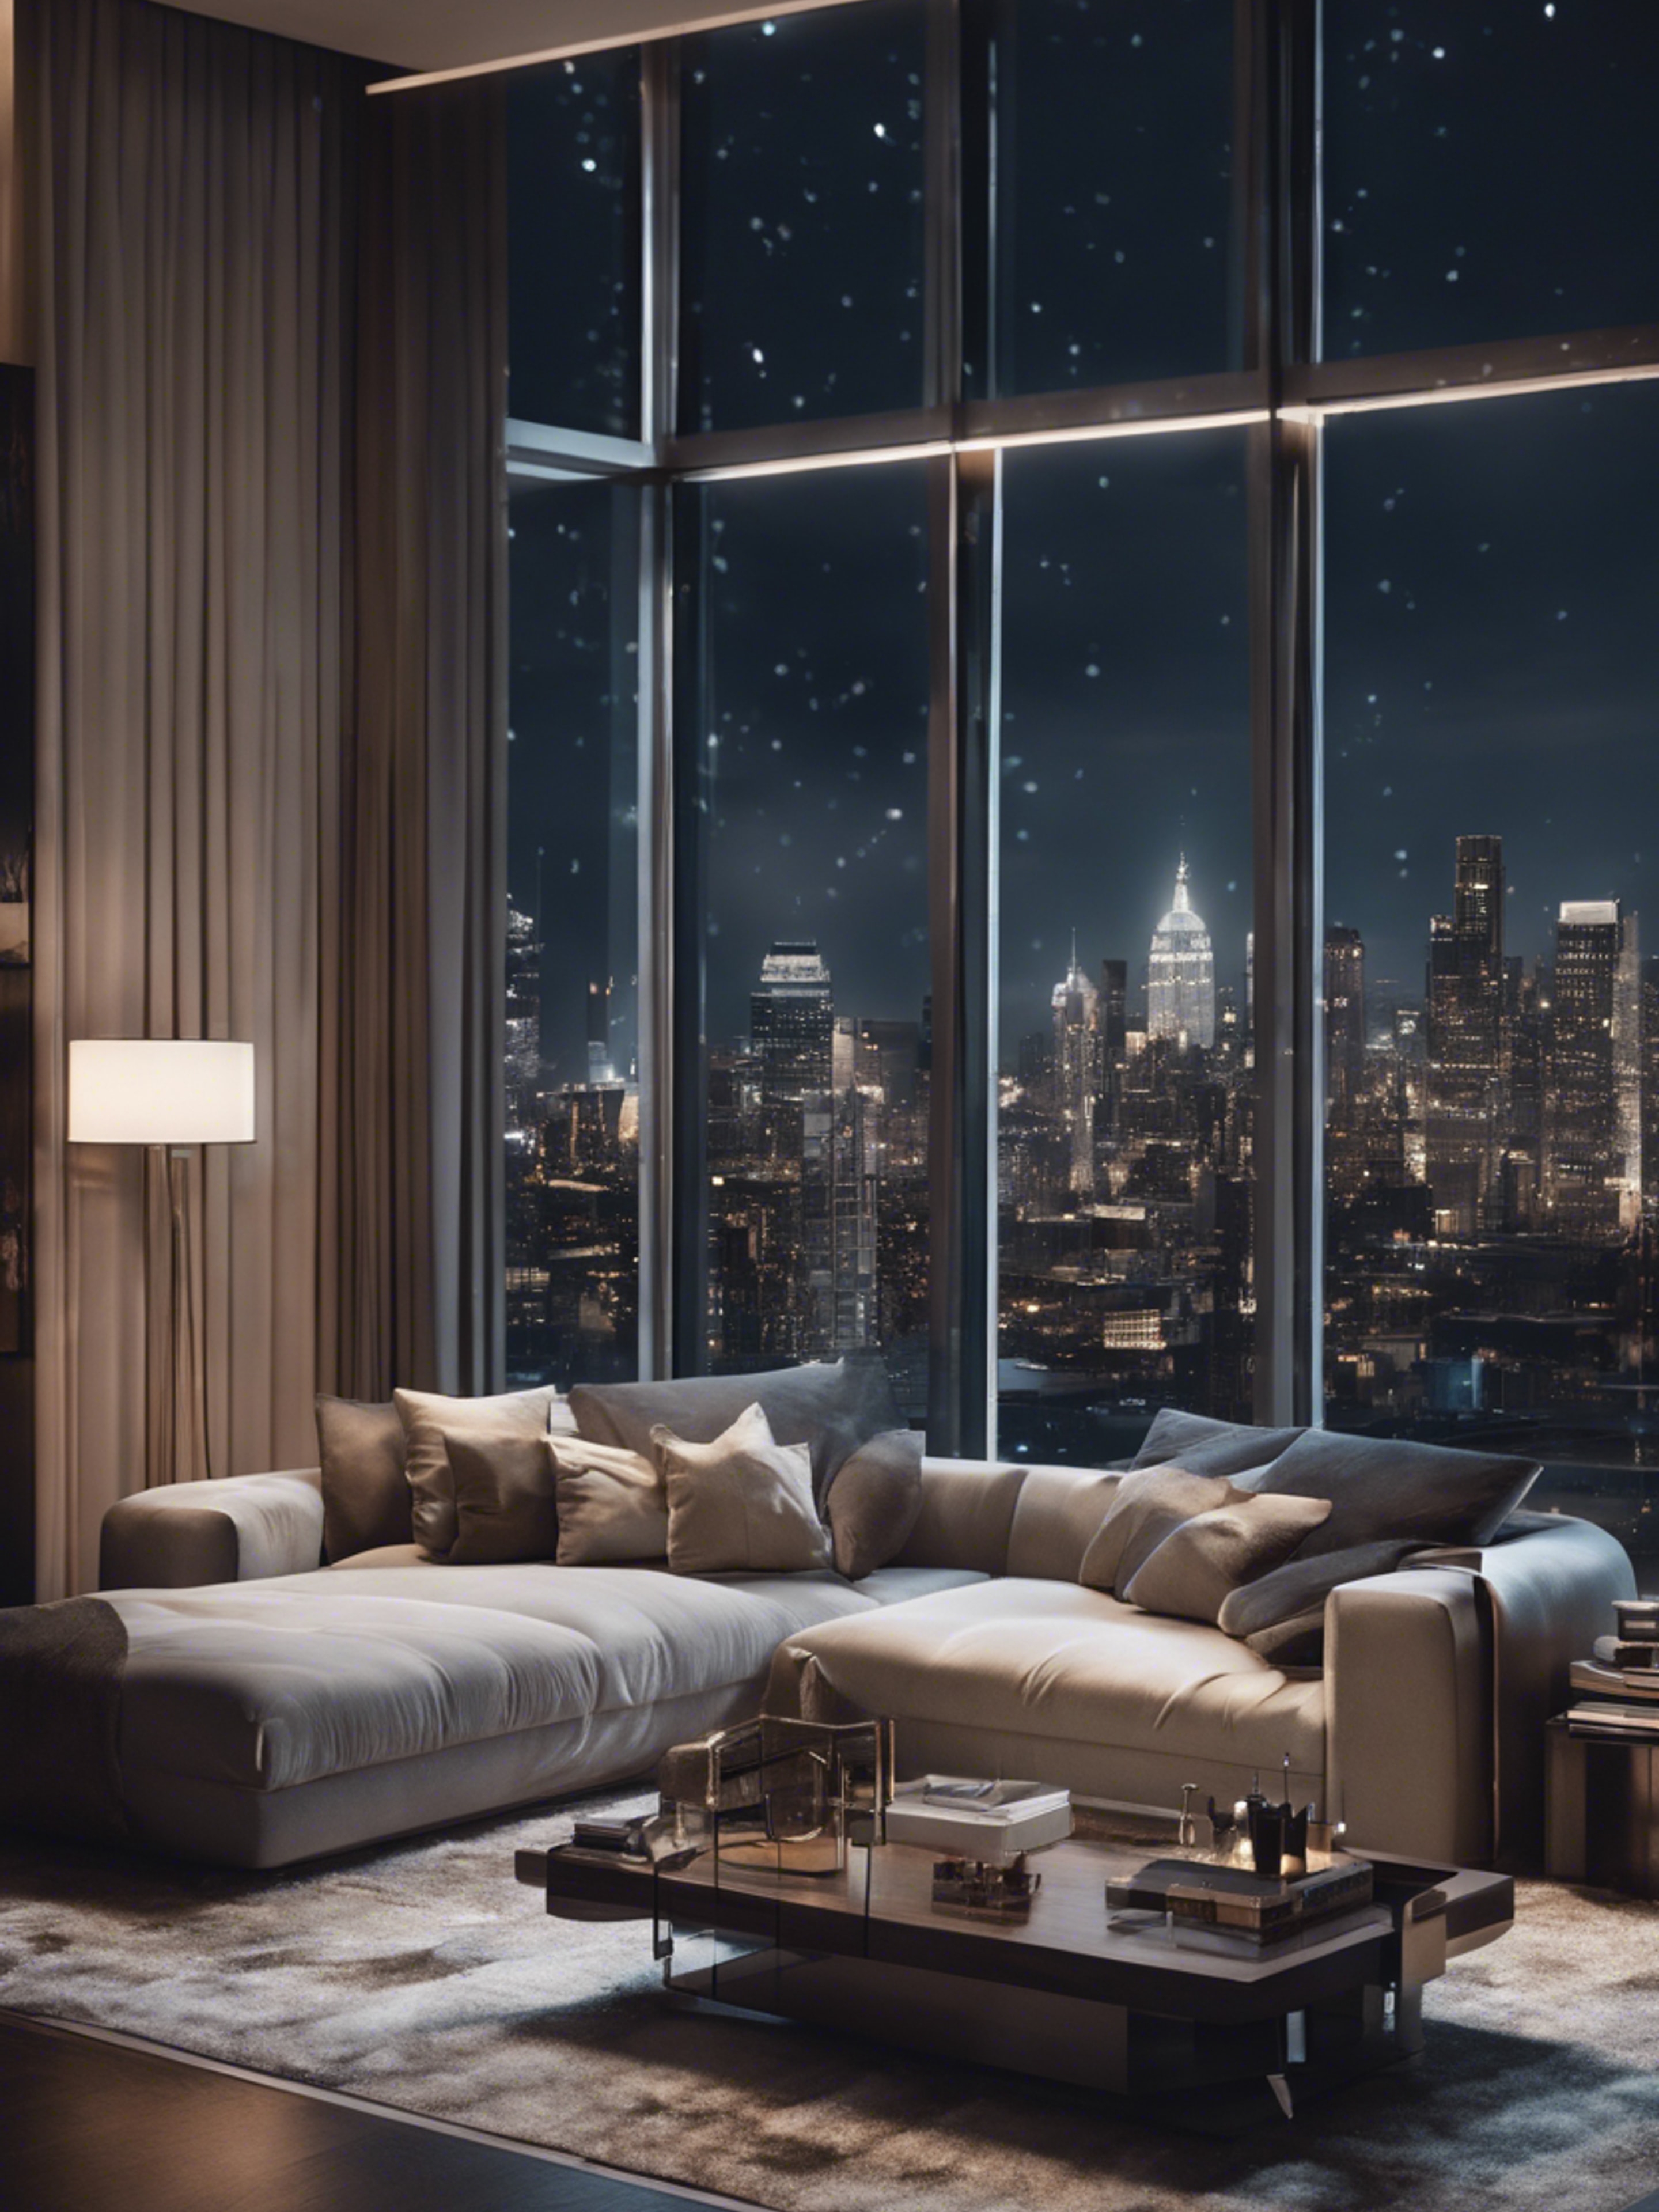 An ultra modern penthouse living room with floor-to-ceiling windows overlooking a night cityscape, adorned with stylish and minimalist decor. Wallpaper[32f92be3d45a43a5bc6a]